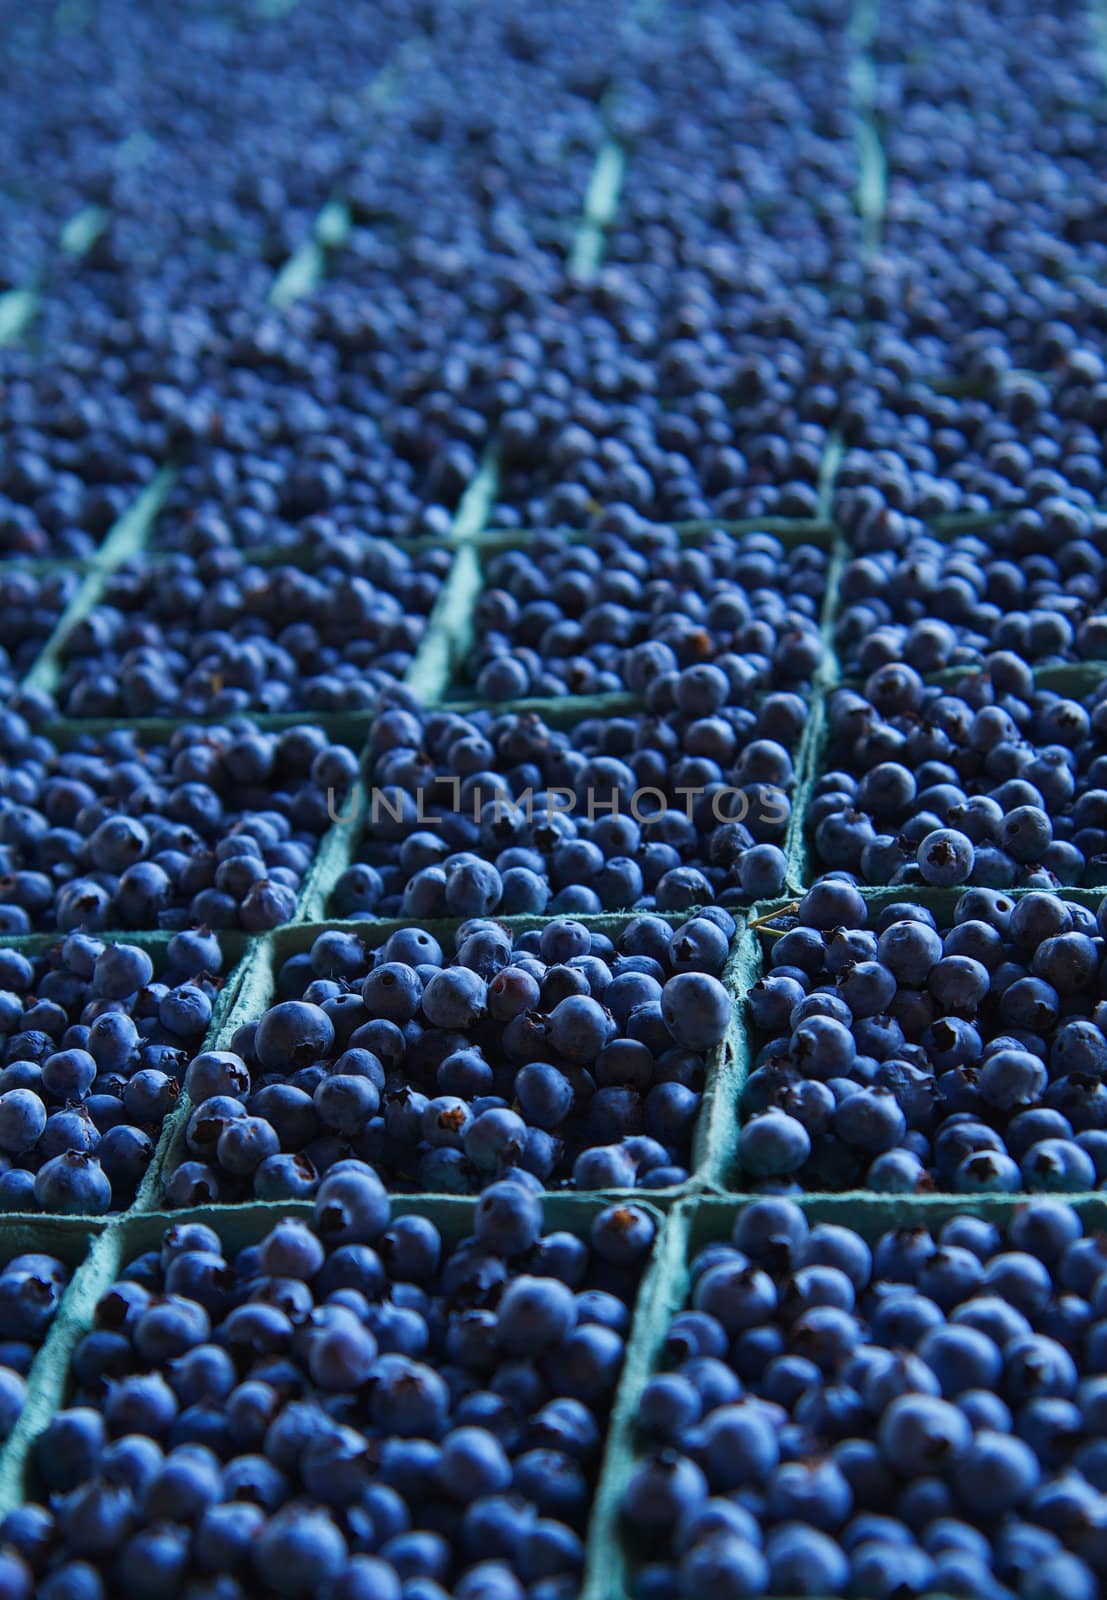 Large table full of dozens of blueberry baskets trailing to soft focus background